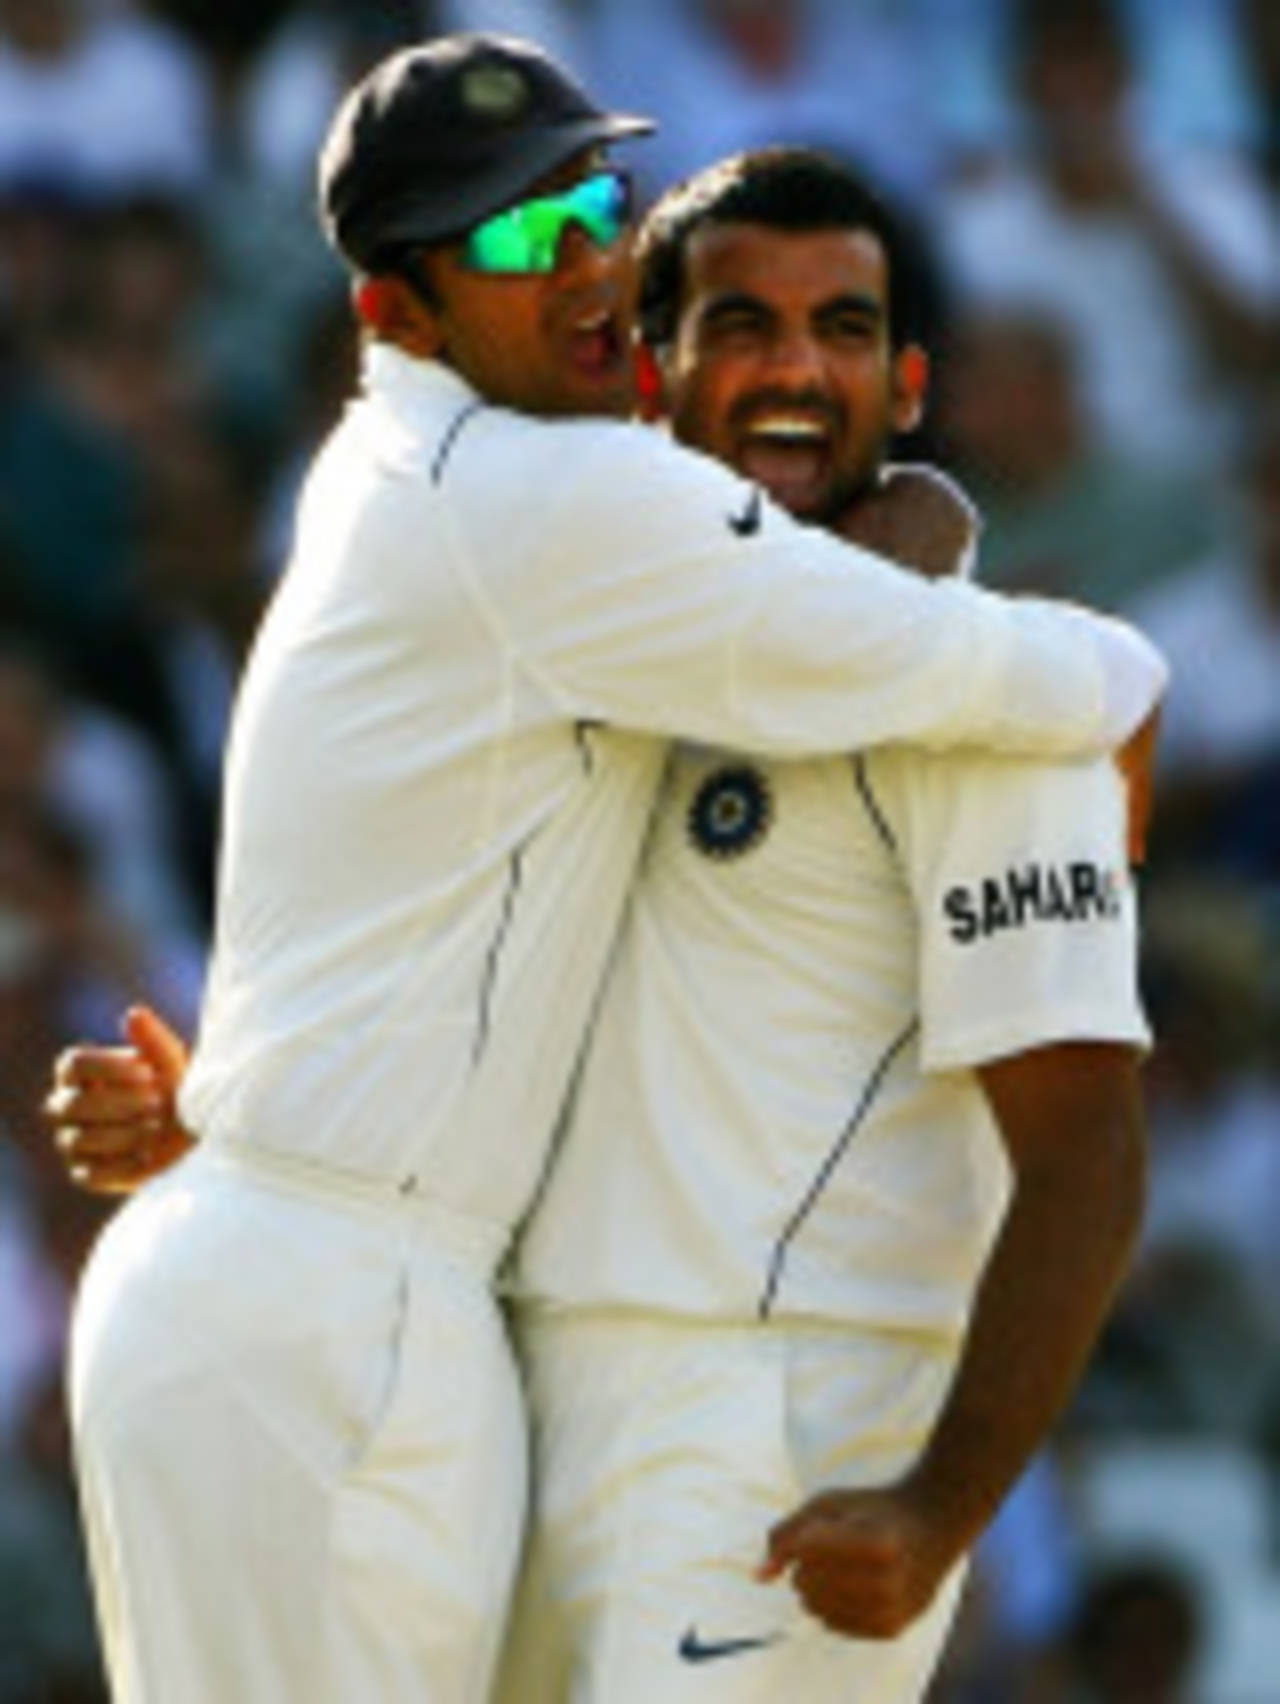 Zaheer Khan and Rahul Dravid celebrate the wicket of Andrew Strauss before stumps, England v India, 3rd Test, The Oval, 2nd day, August 10, 2007